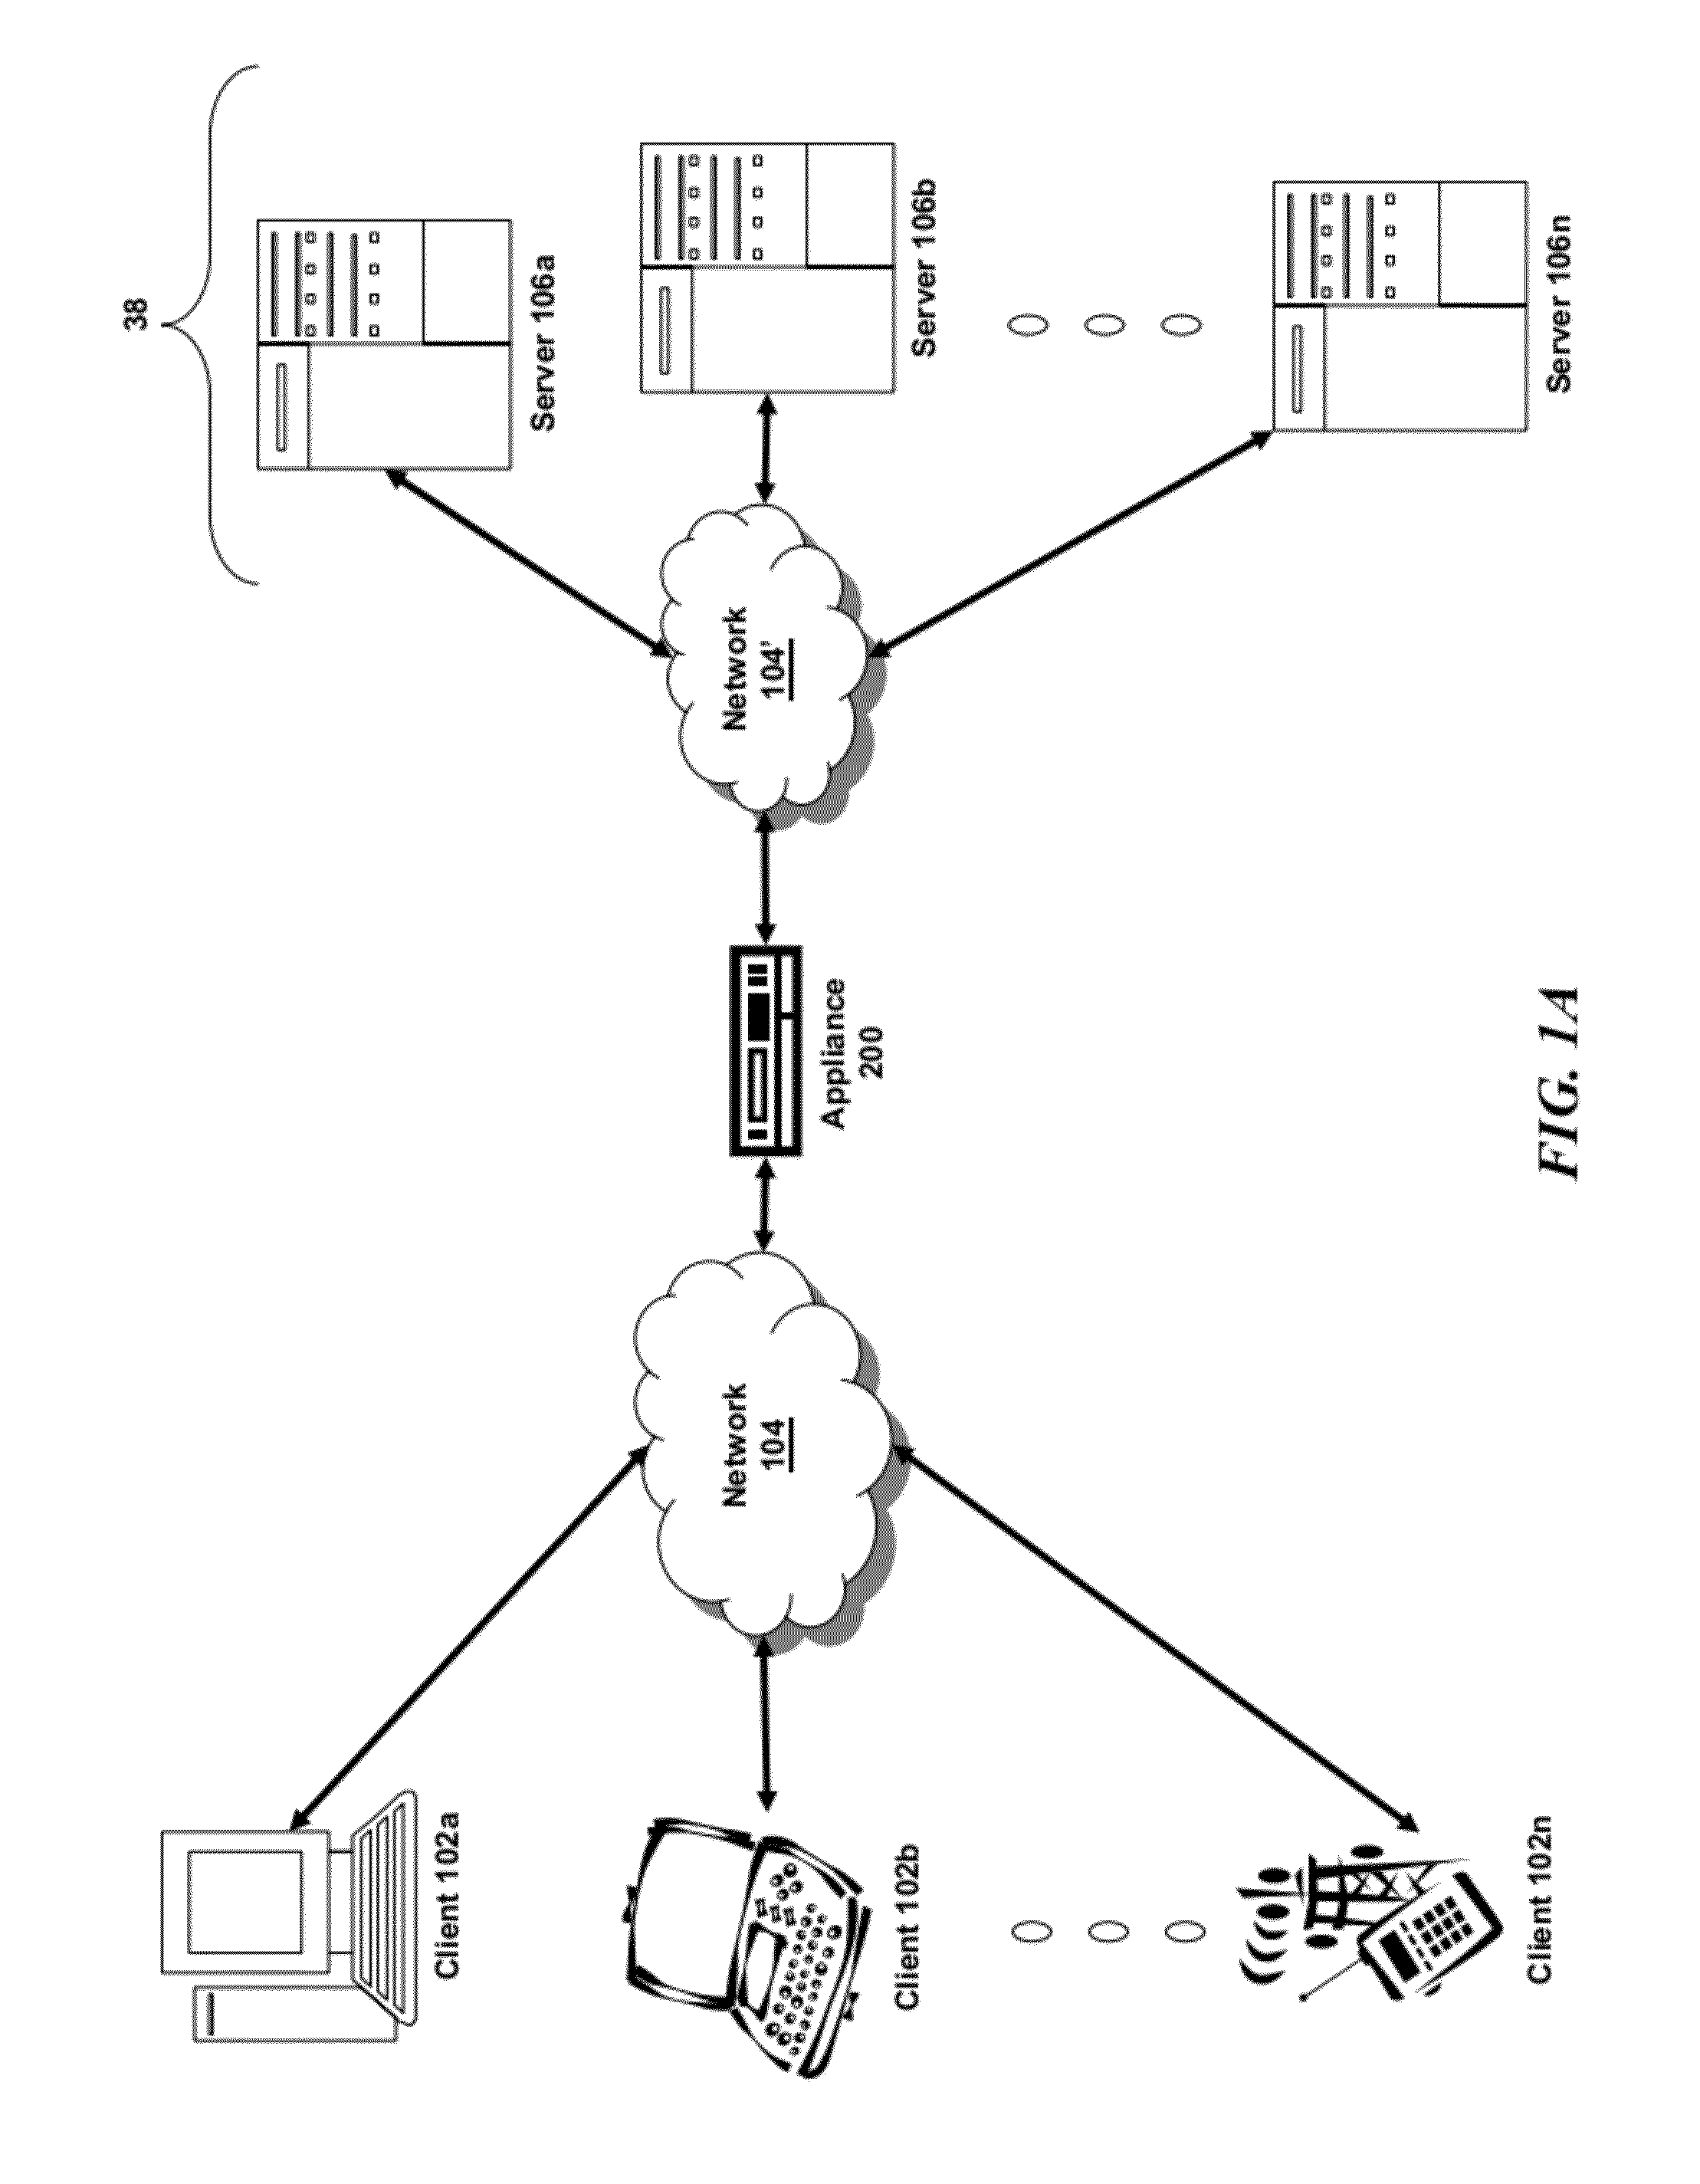 Systems and methods of UTF-8 pattern matching